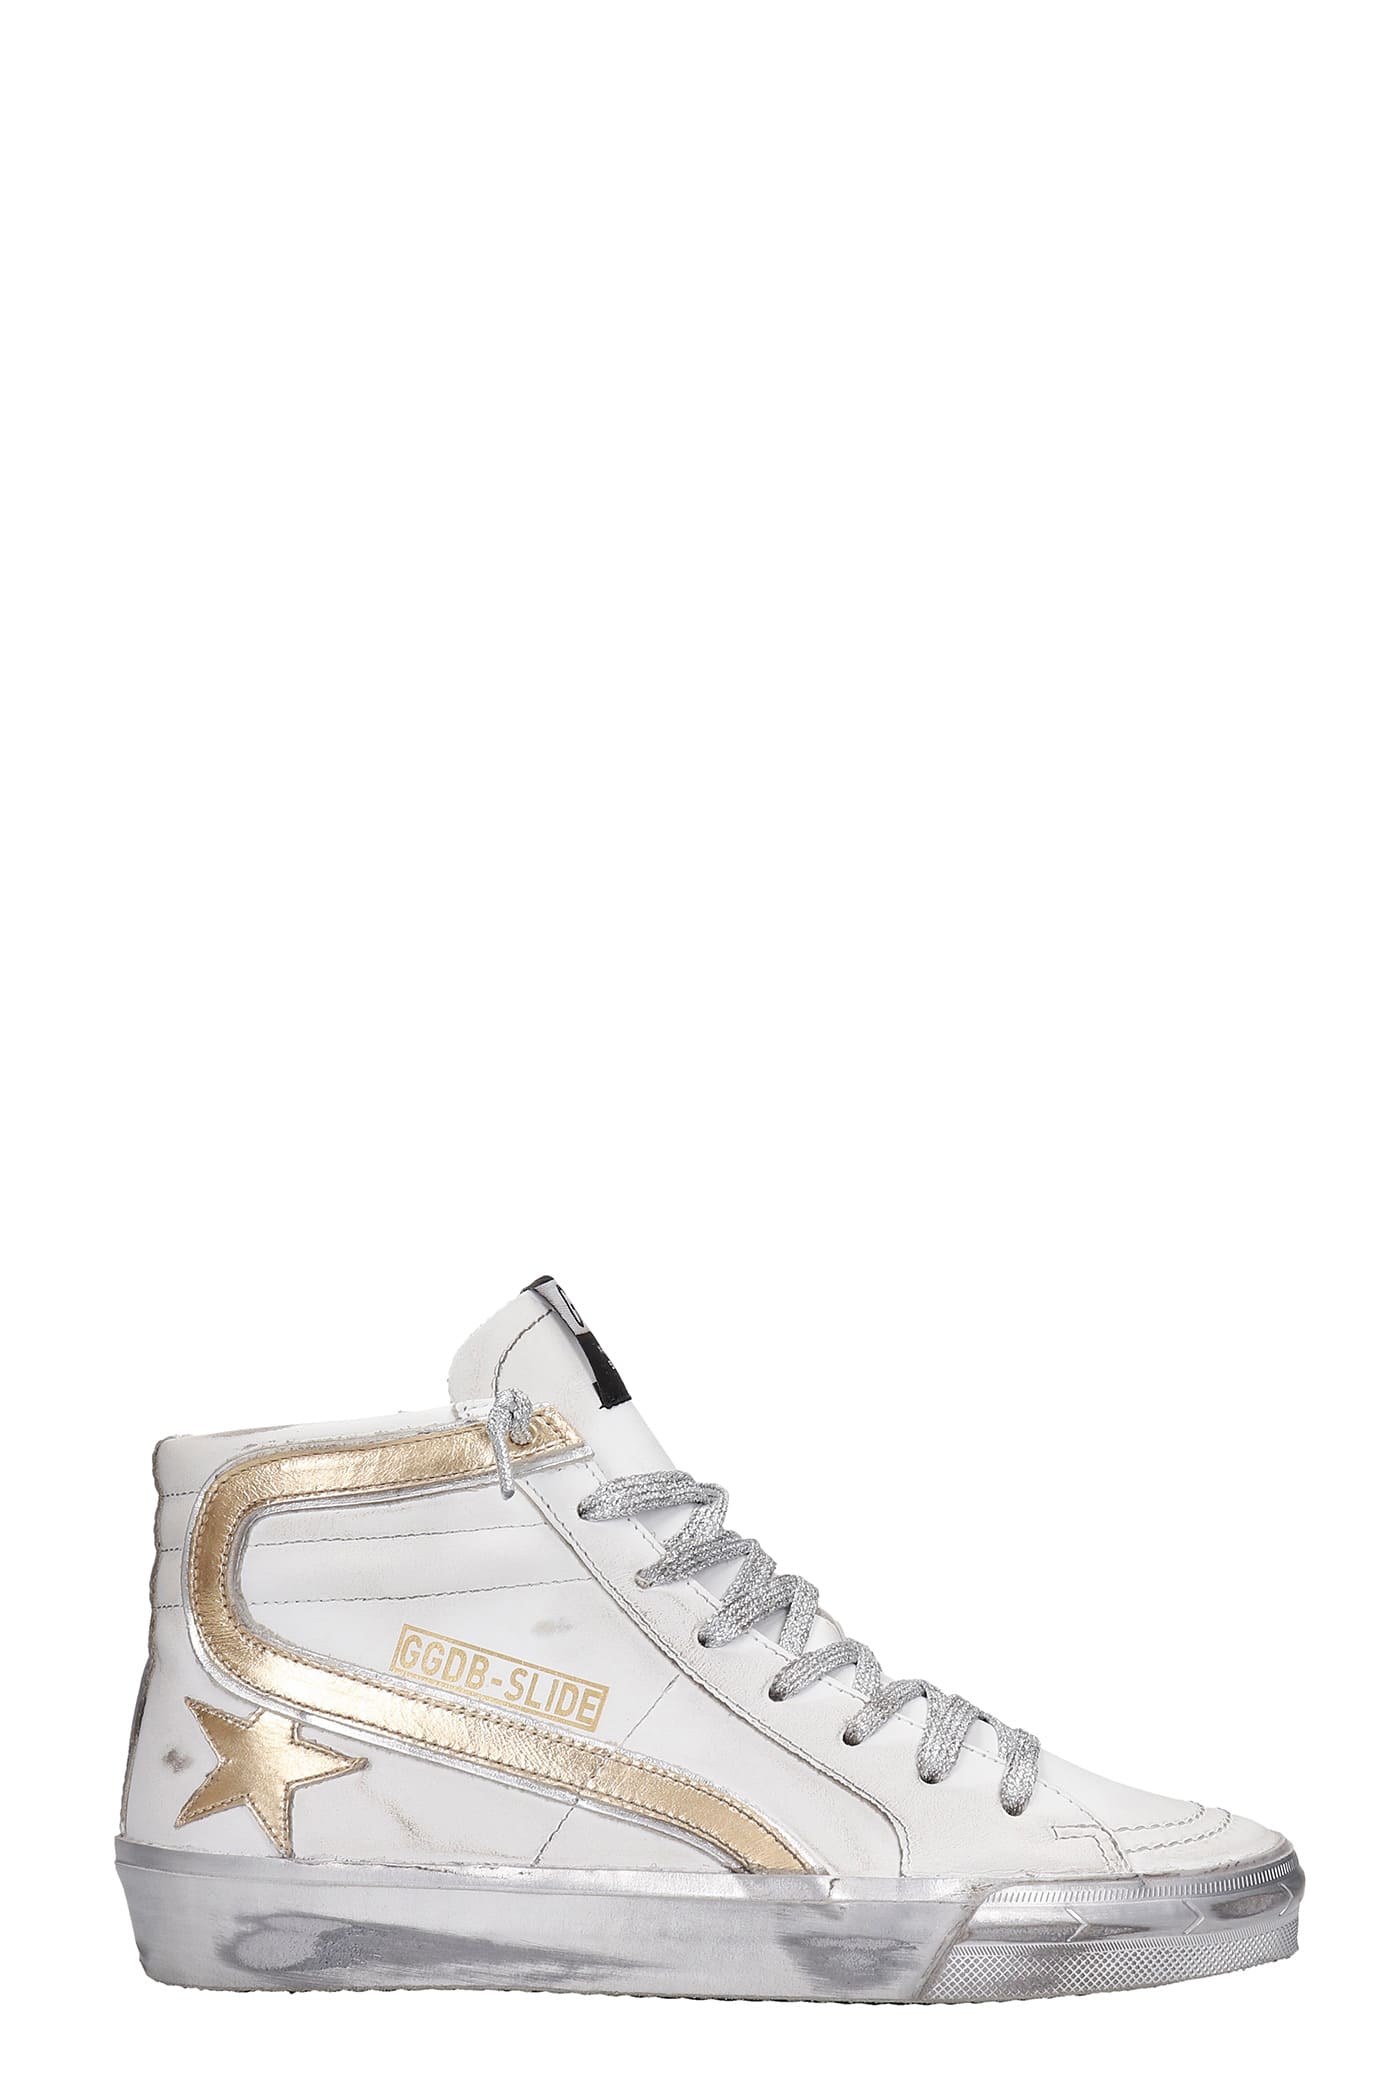 Buy Golden Goose Slide Sneakers In White Leather online, shop Golden Goose shoes with free shipping